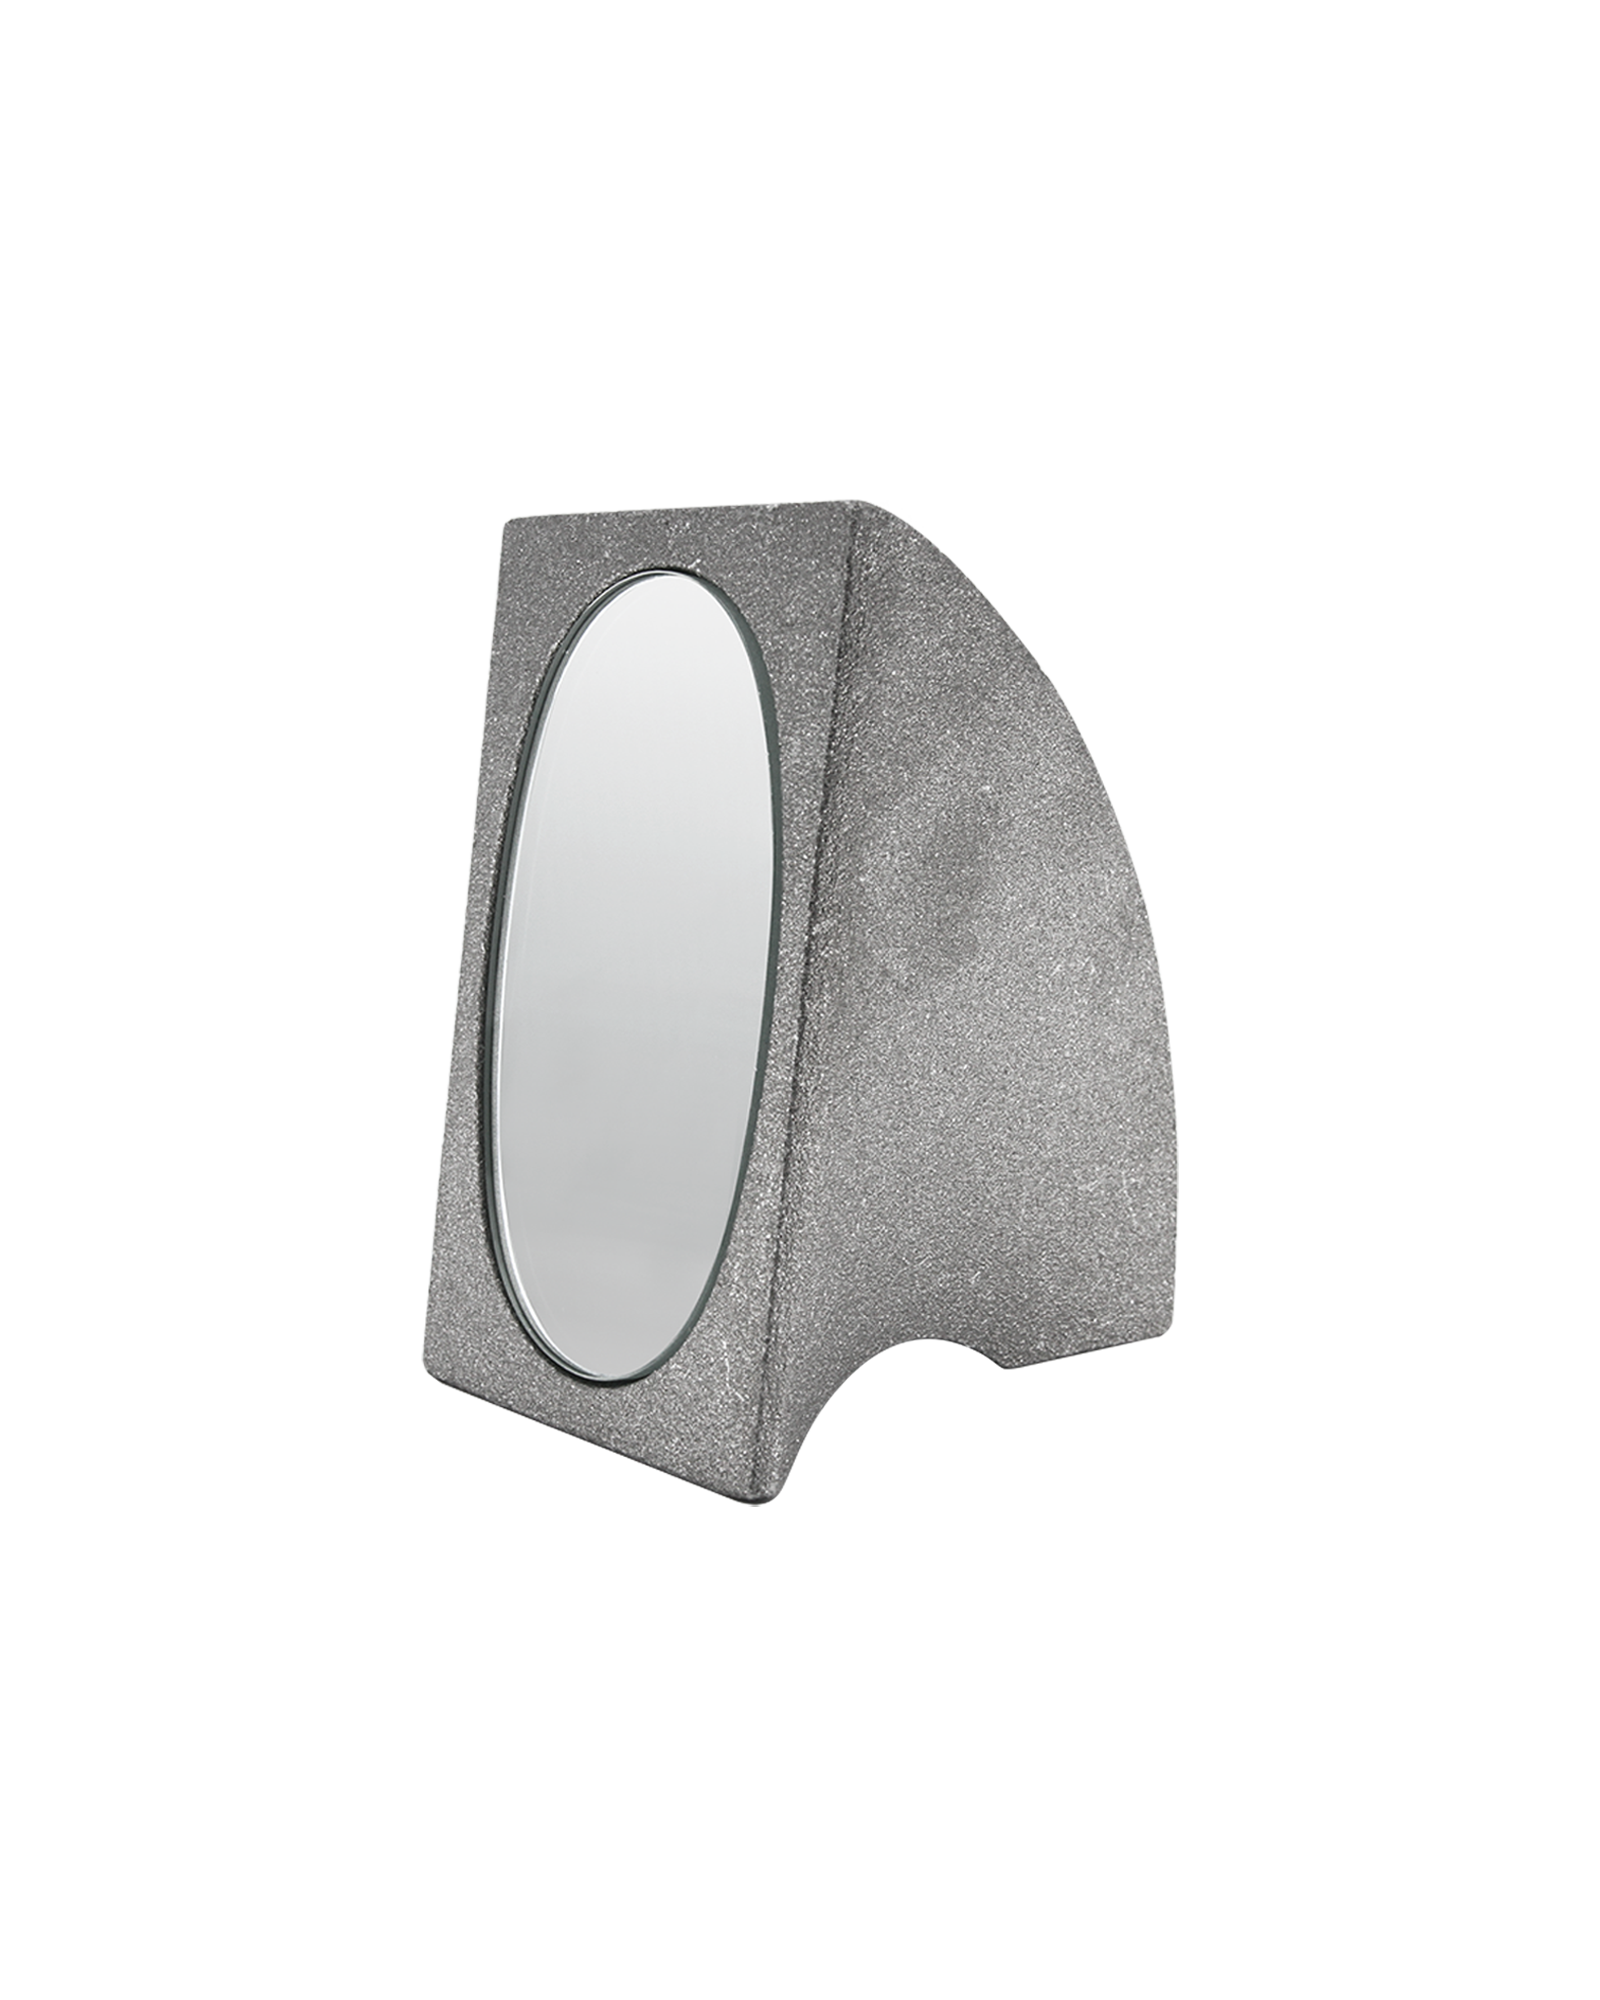 HOLE STAND MIRROR (CONC)